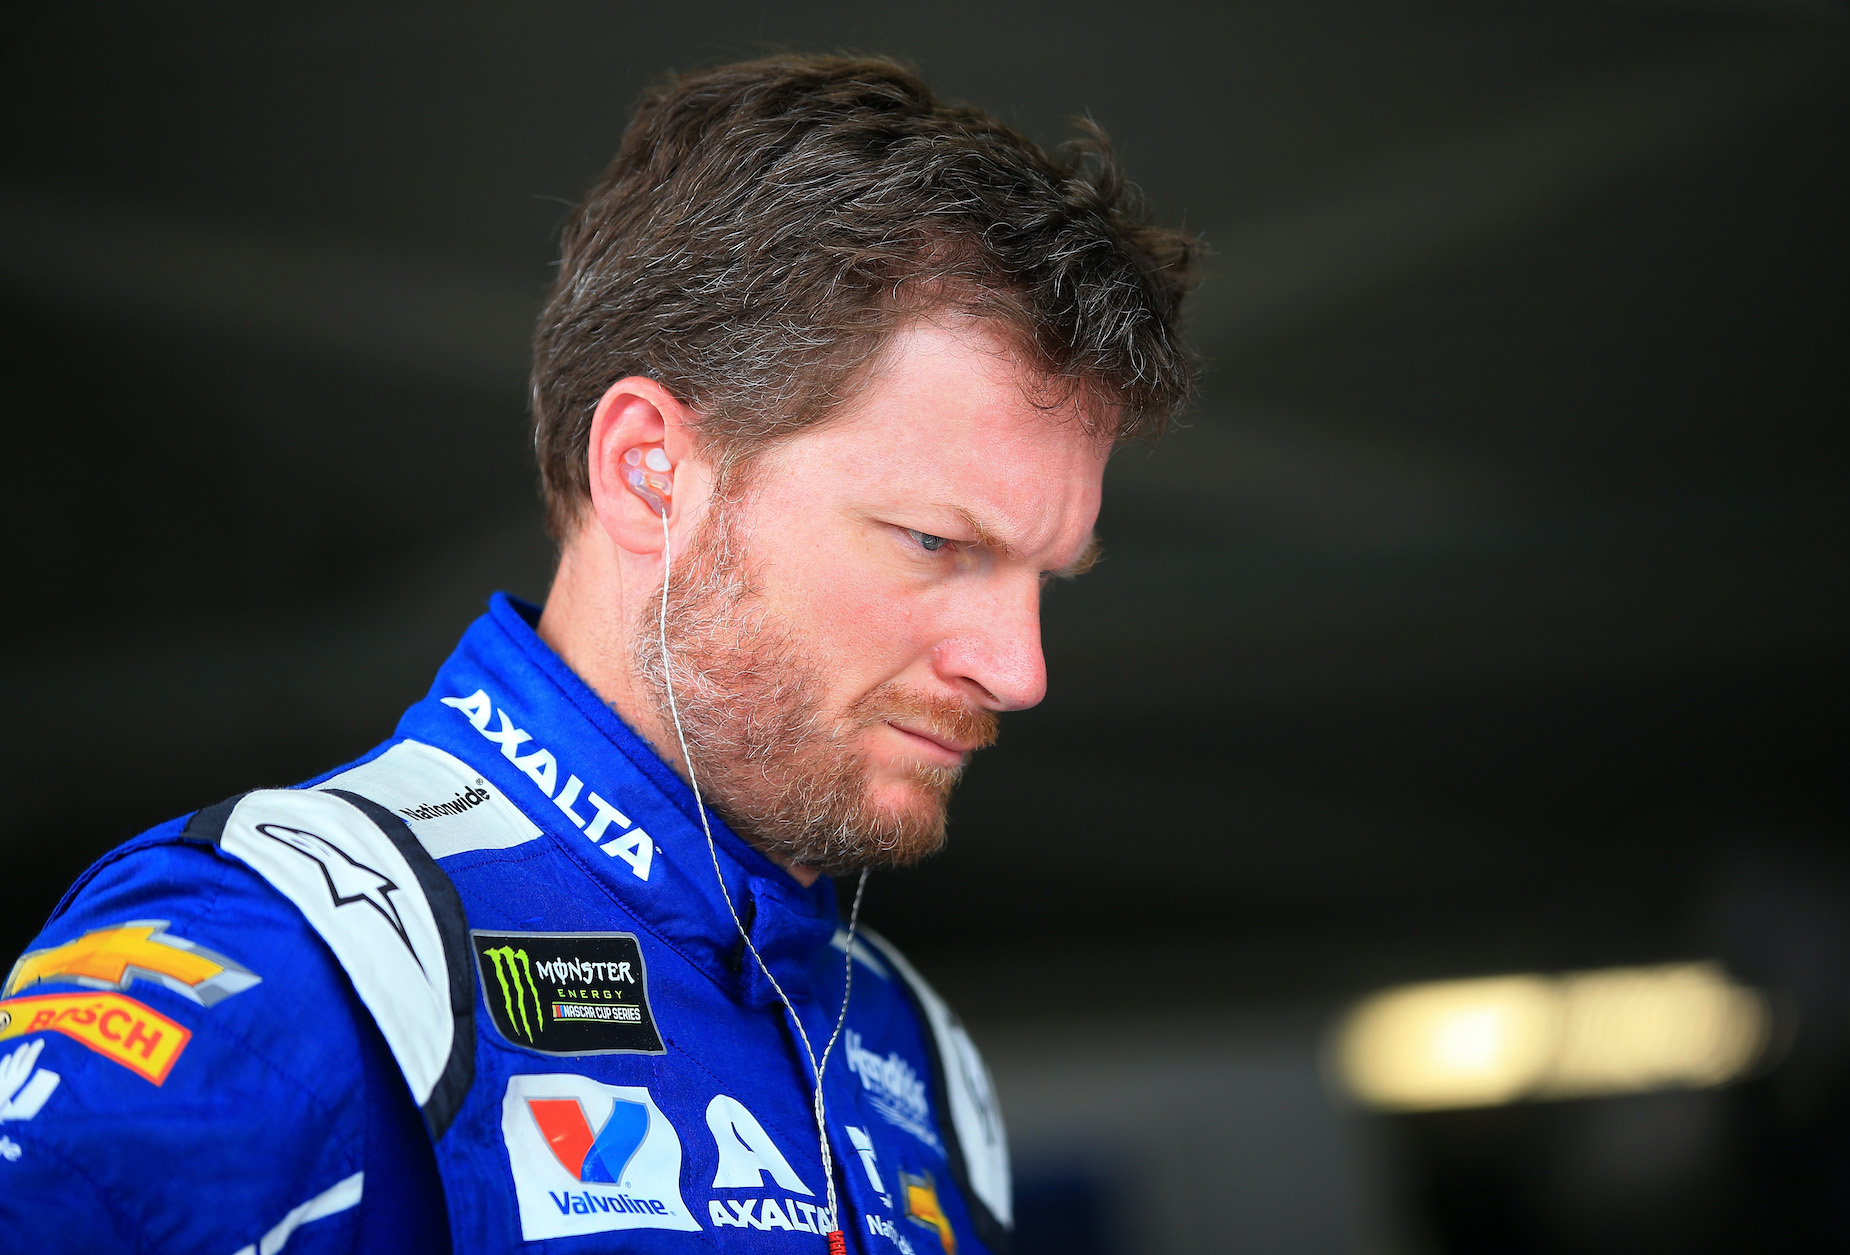 NASCAR star Dale Earnhardt Jr. during the 2017 Cup Series campaign.